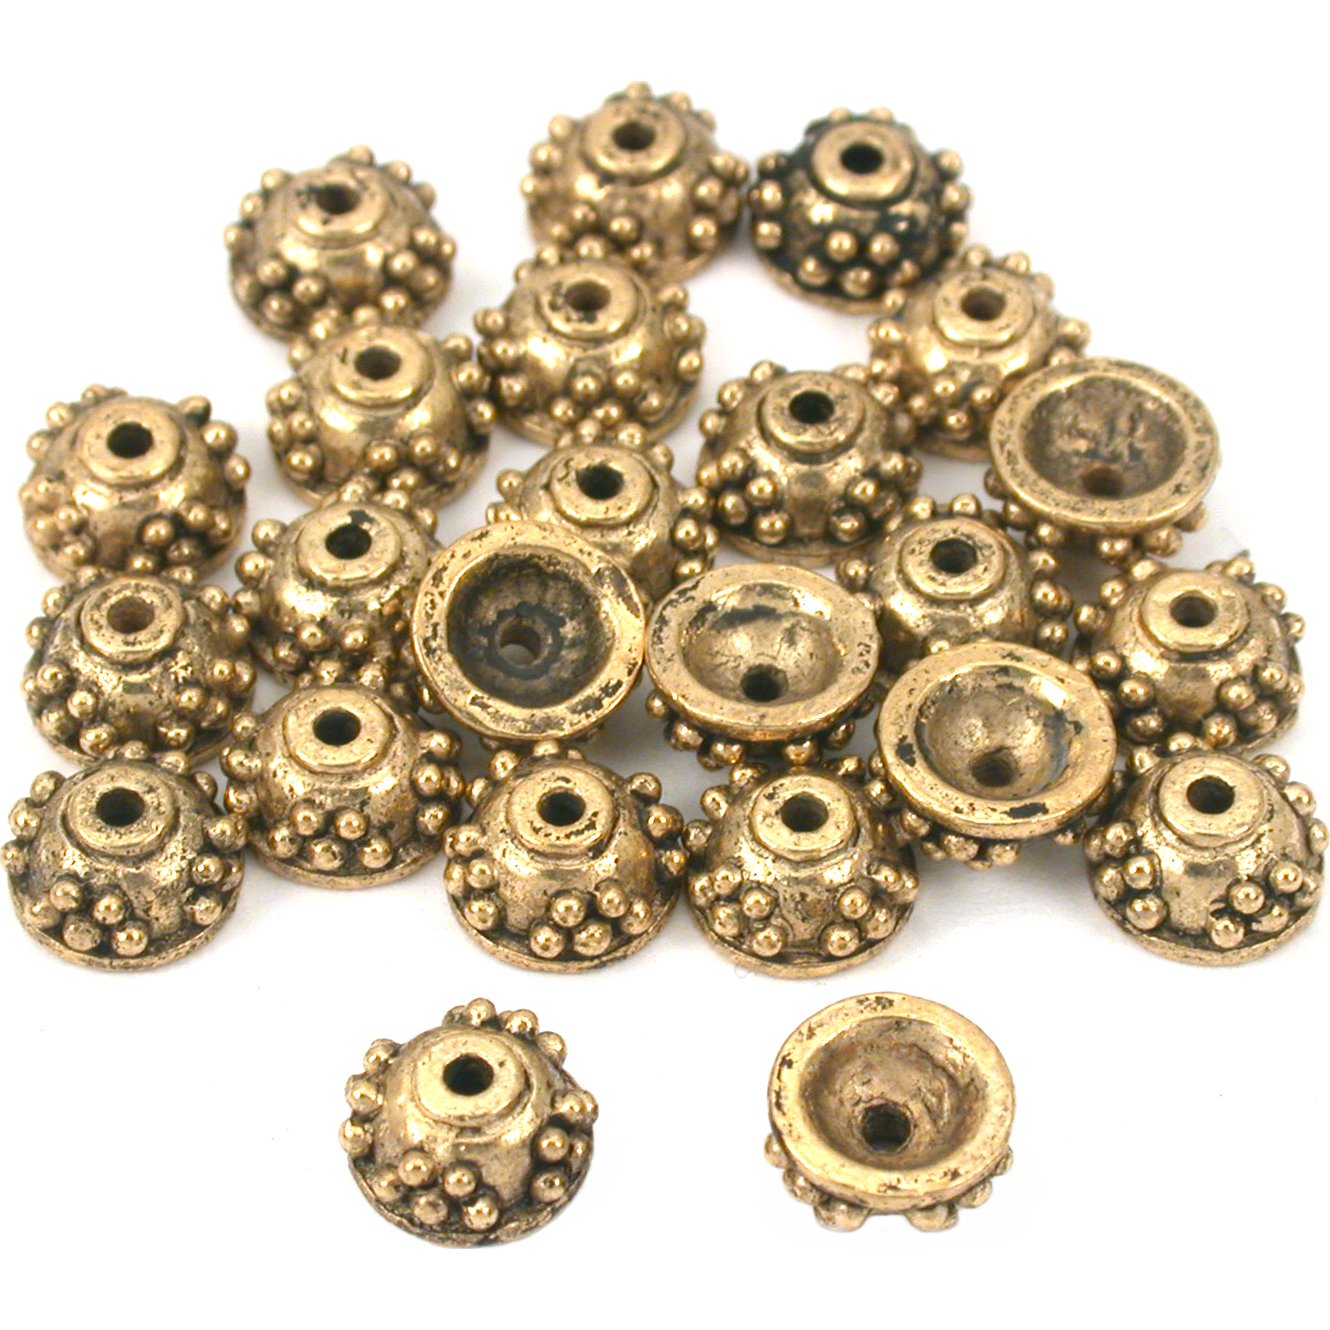 Bali Bead Caps Antique Gold Plated 7mm 24Pcs Approx.